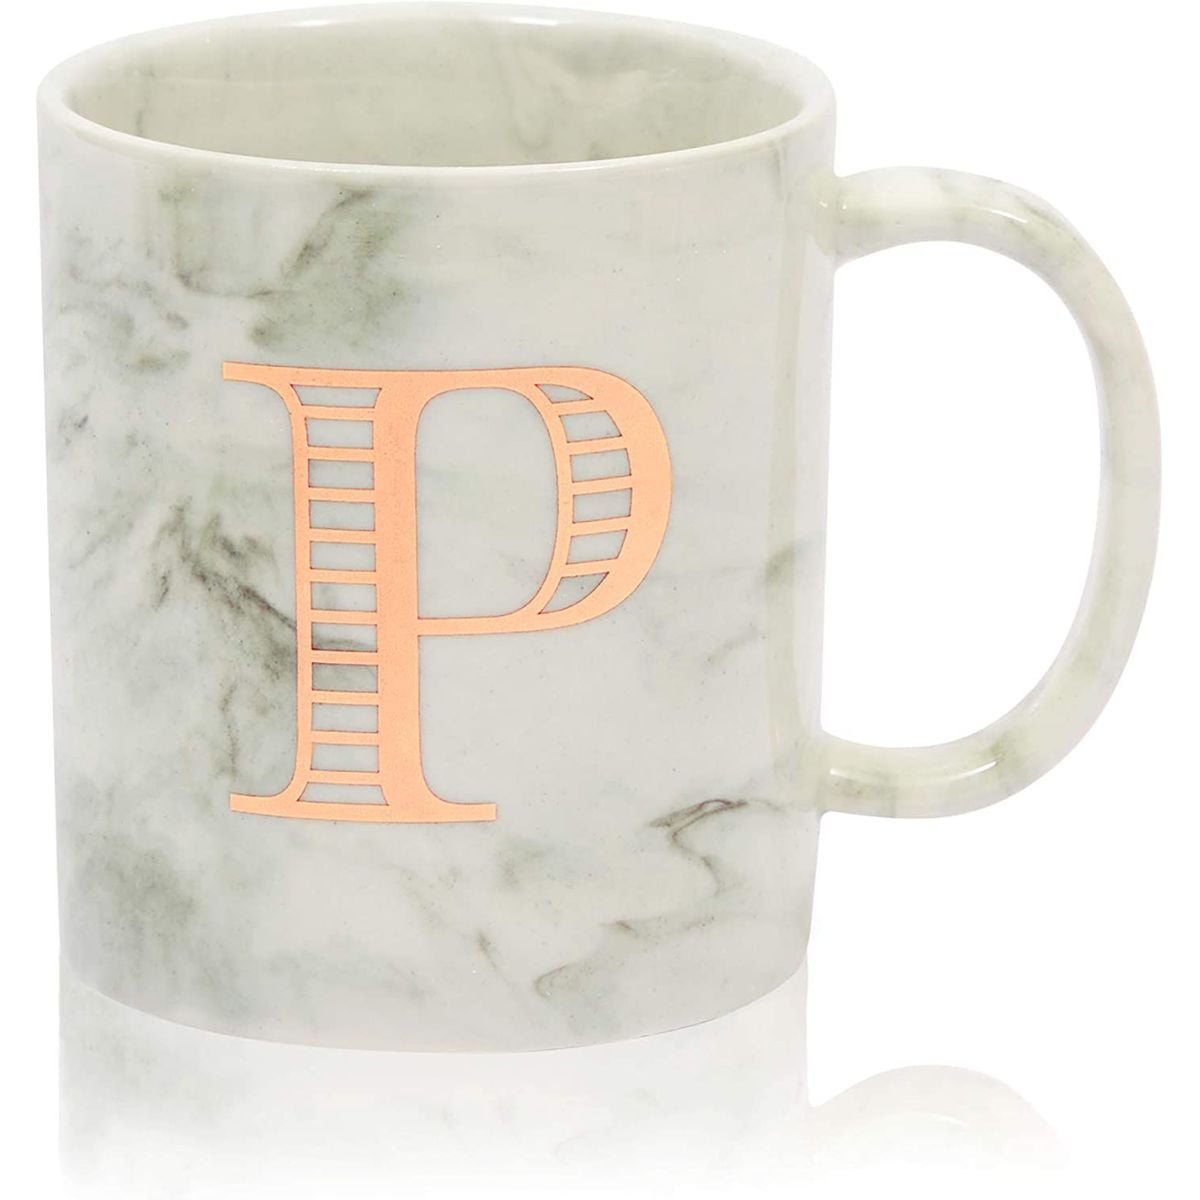 Anthropologie White Shaver Initial "C" Coffee or Tea Mug/Cup FREE SHIPPING!!!